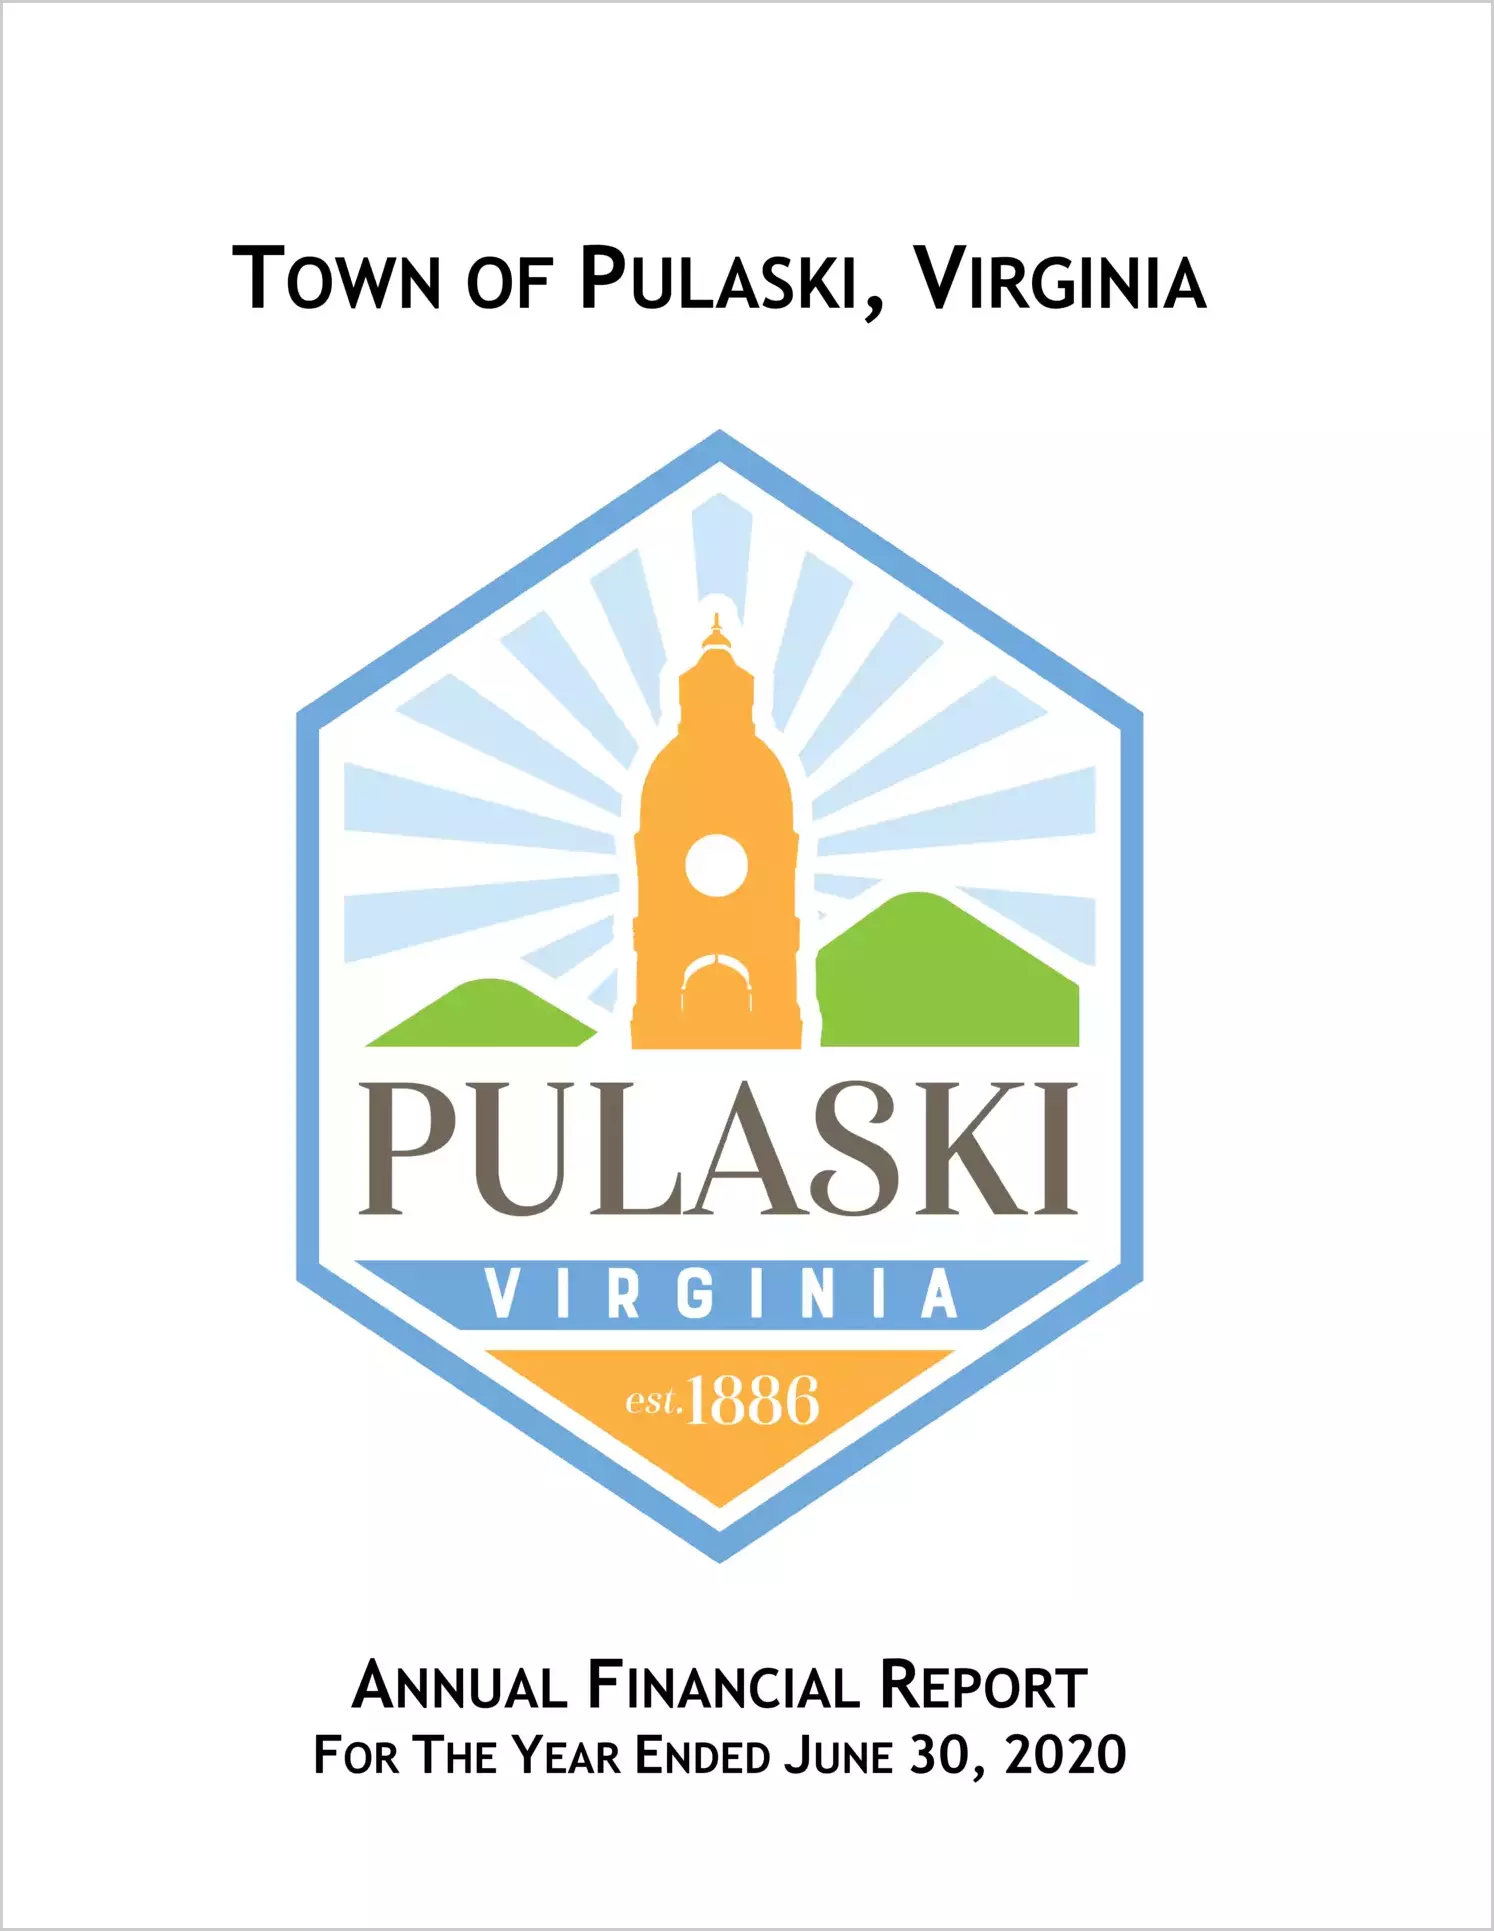 2020 Annual Financial Report for Town of Pulaski